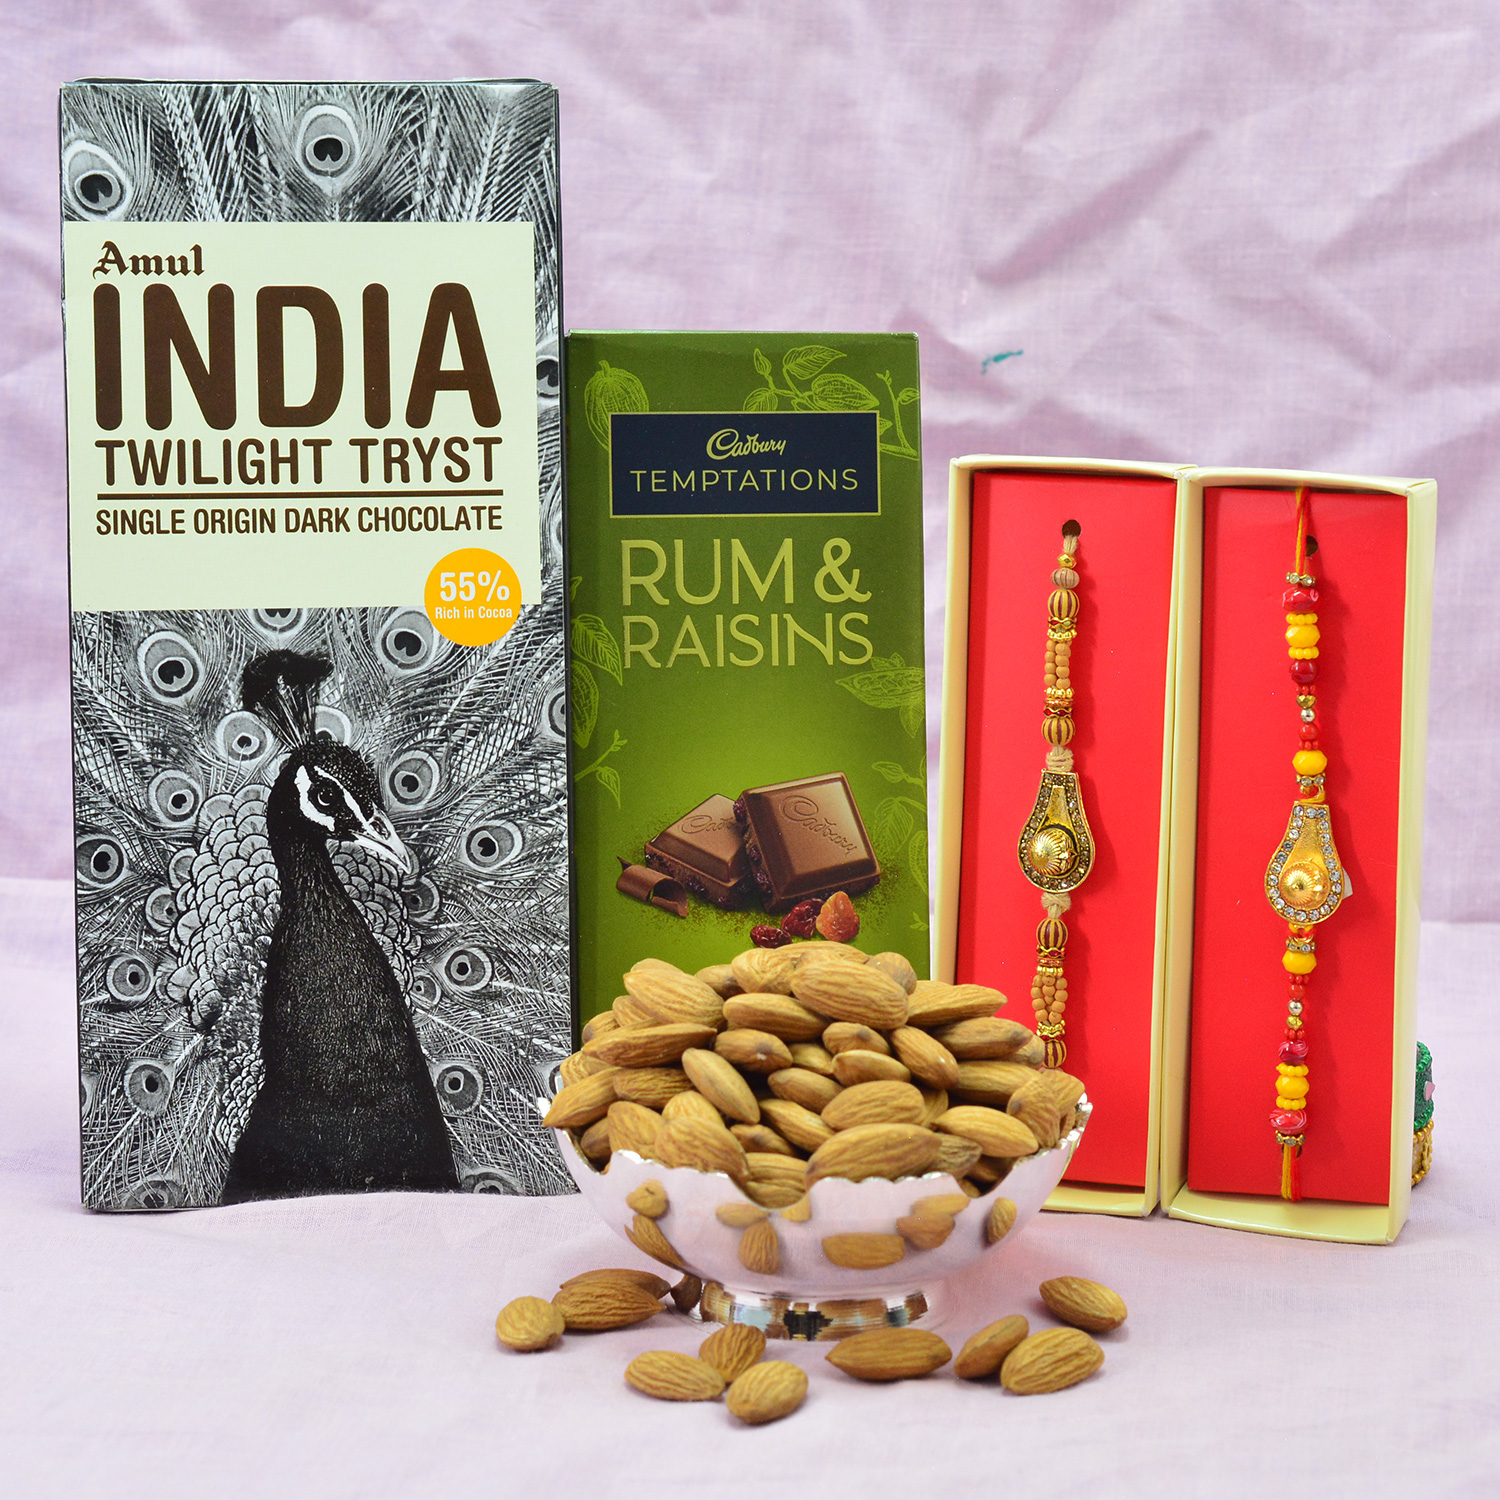 Rum Raisins Temptation with Amul Twilight Tryst Chocolate and Amazing Brother Rakhis with Dry Fruits Hampers